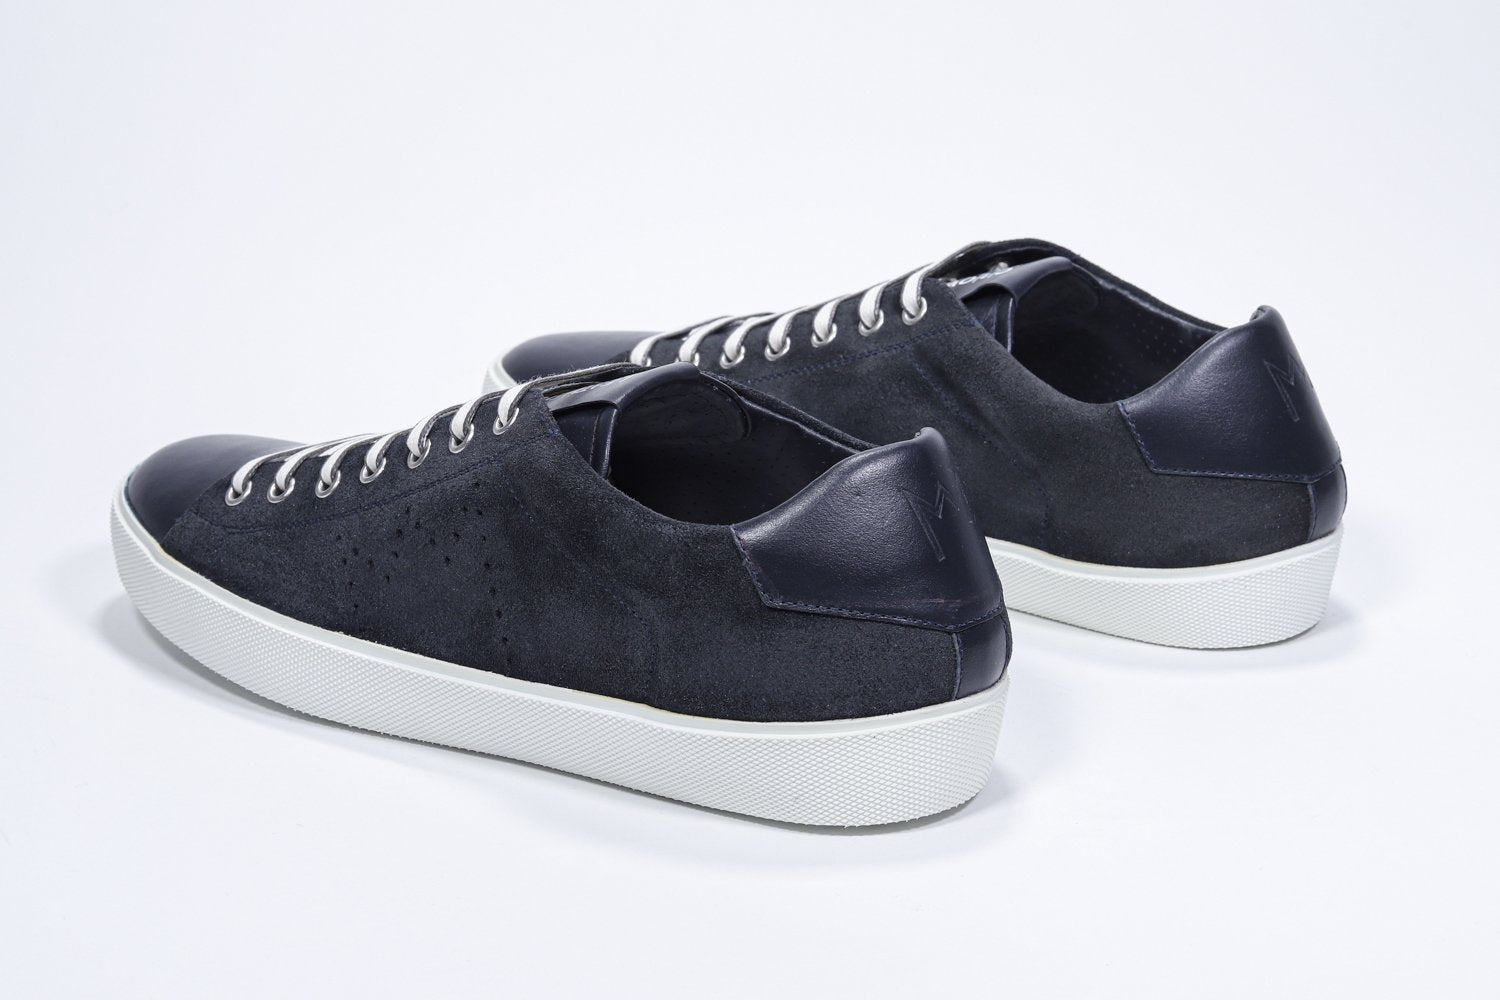 Three quarter back view of low top navy sneaker with perforated crown logo on upper. Full suede upper and white rubber sole.